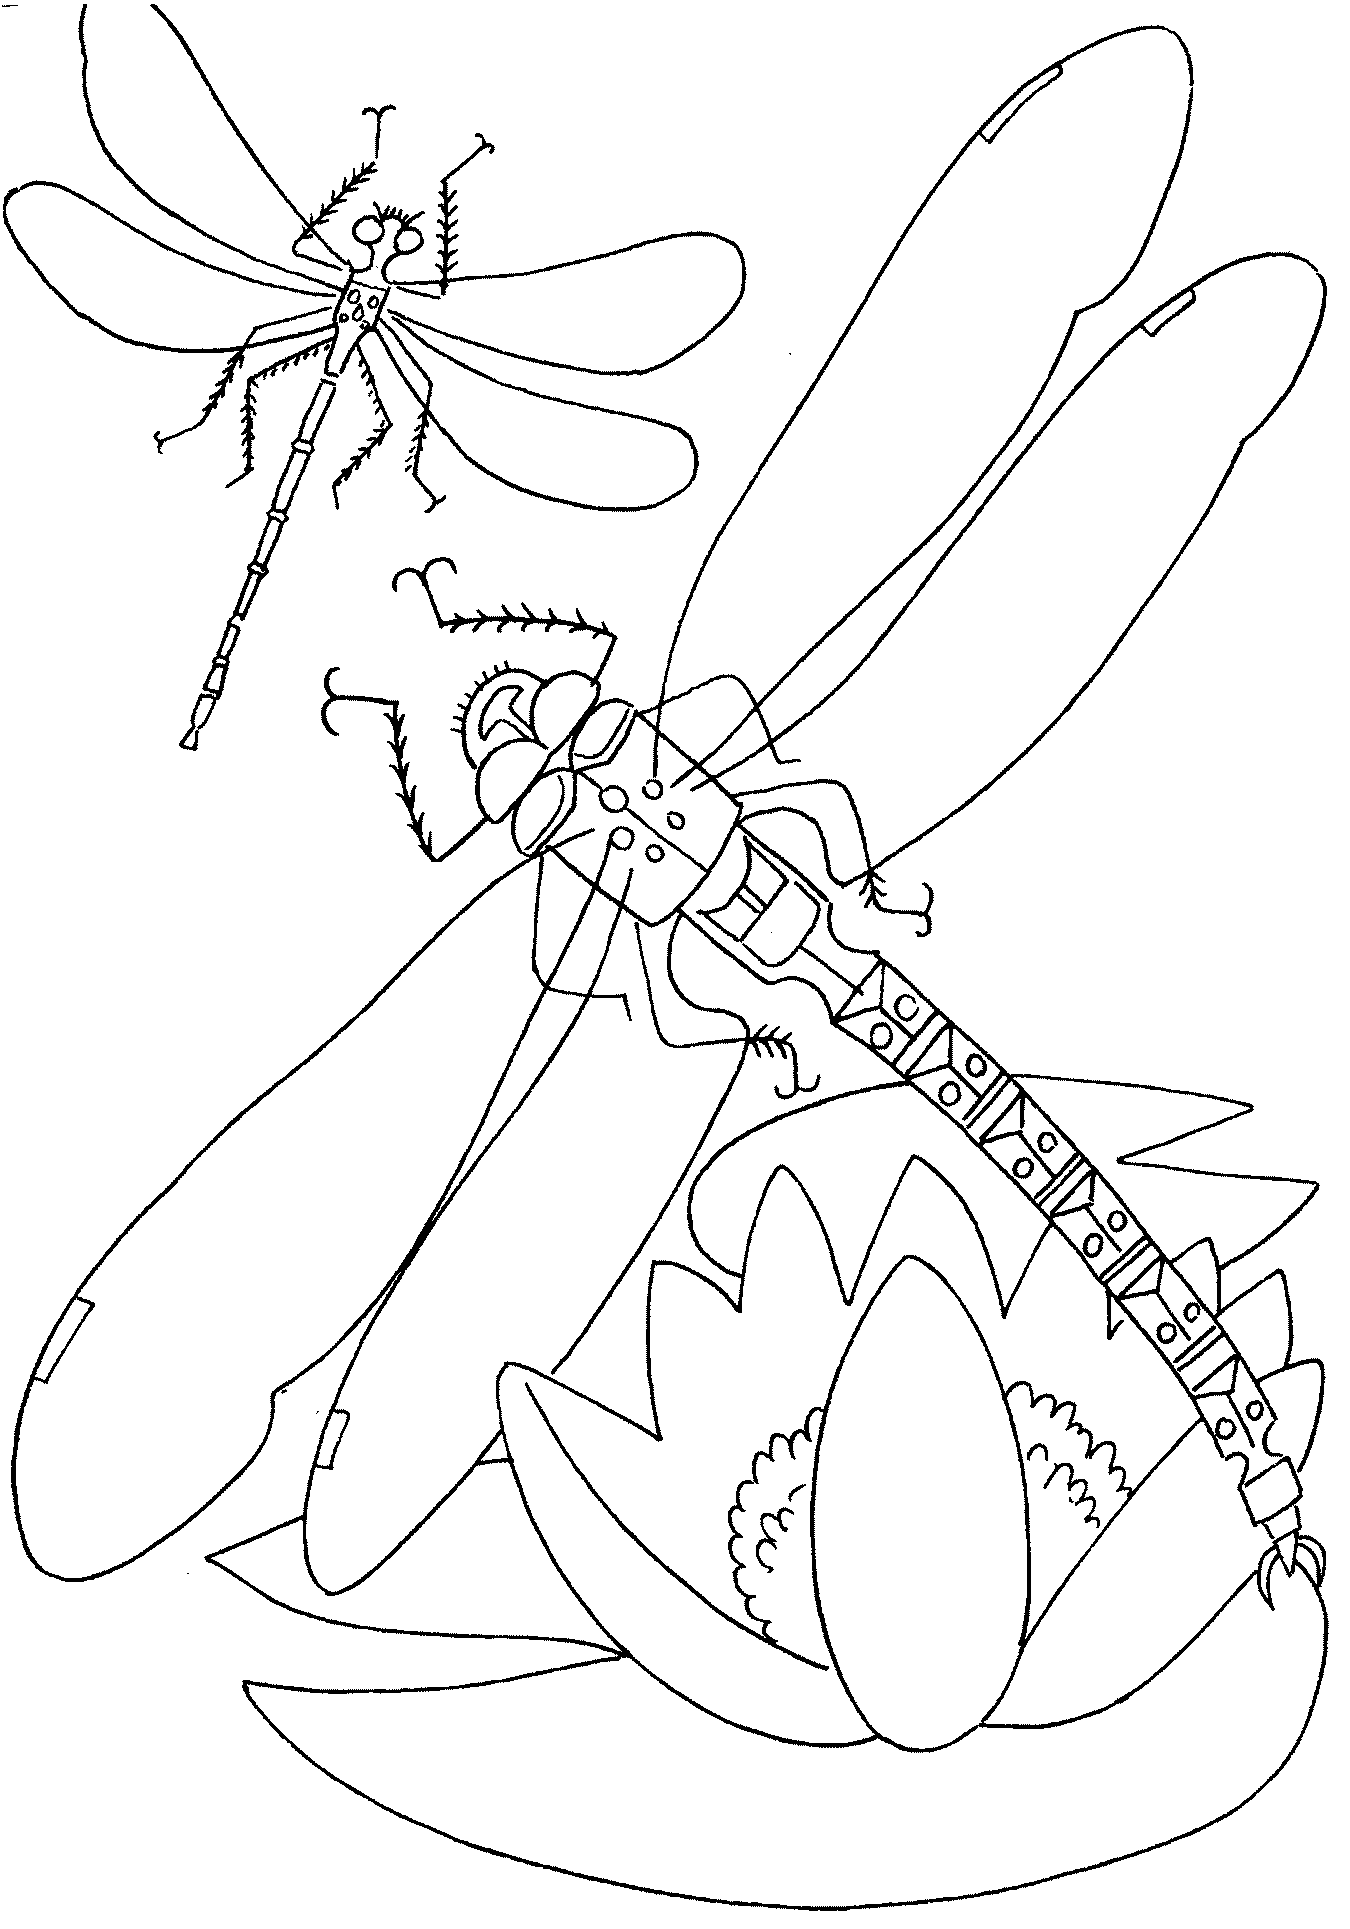 dragonfly coloring dragonfly coloring pages getcoloringpagescom coloring dragonfly 